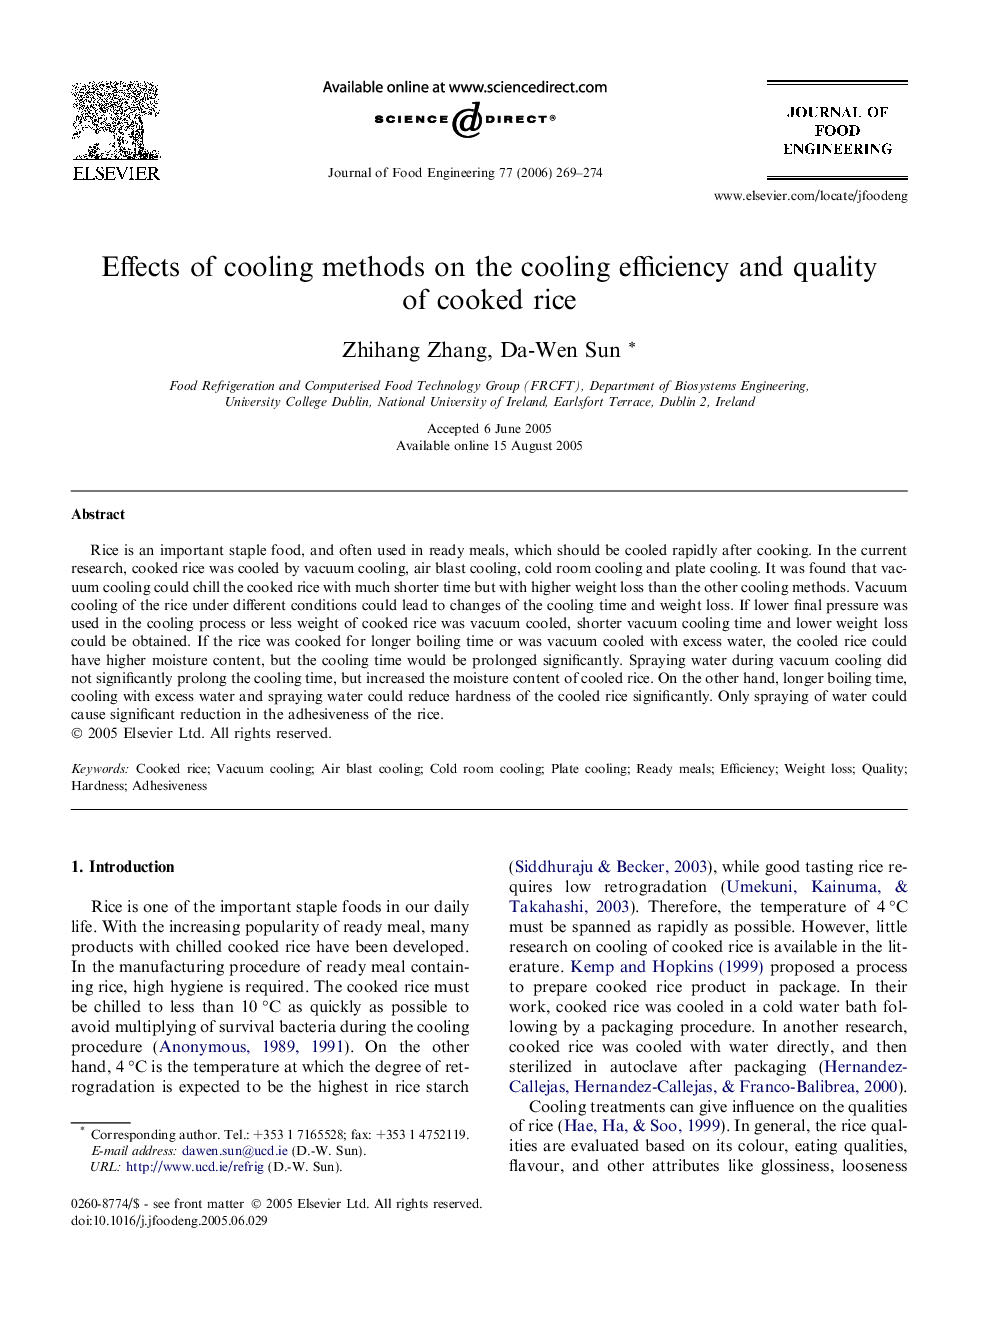 Effects of cooling methods on the cooling efficiency and quality of cooked rice